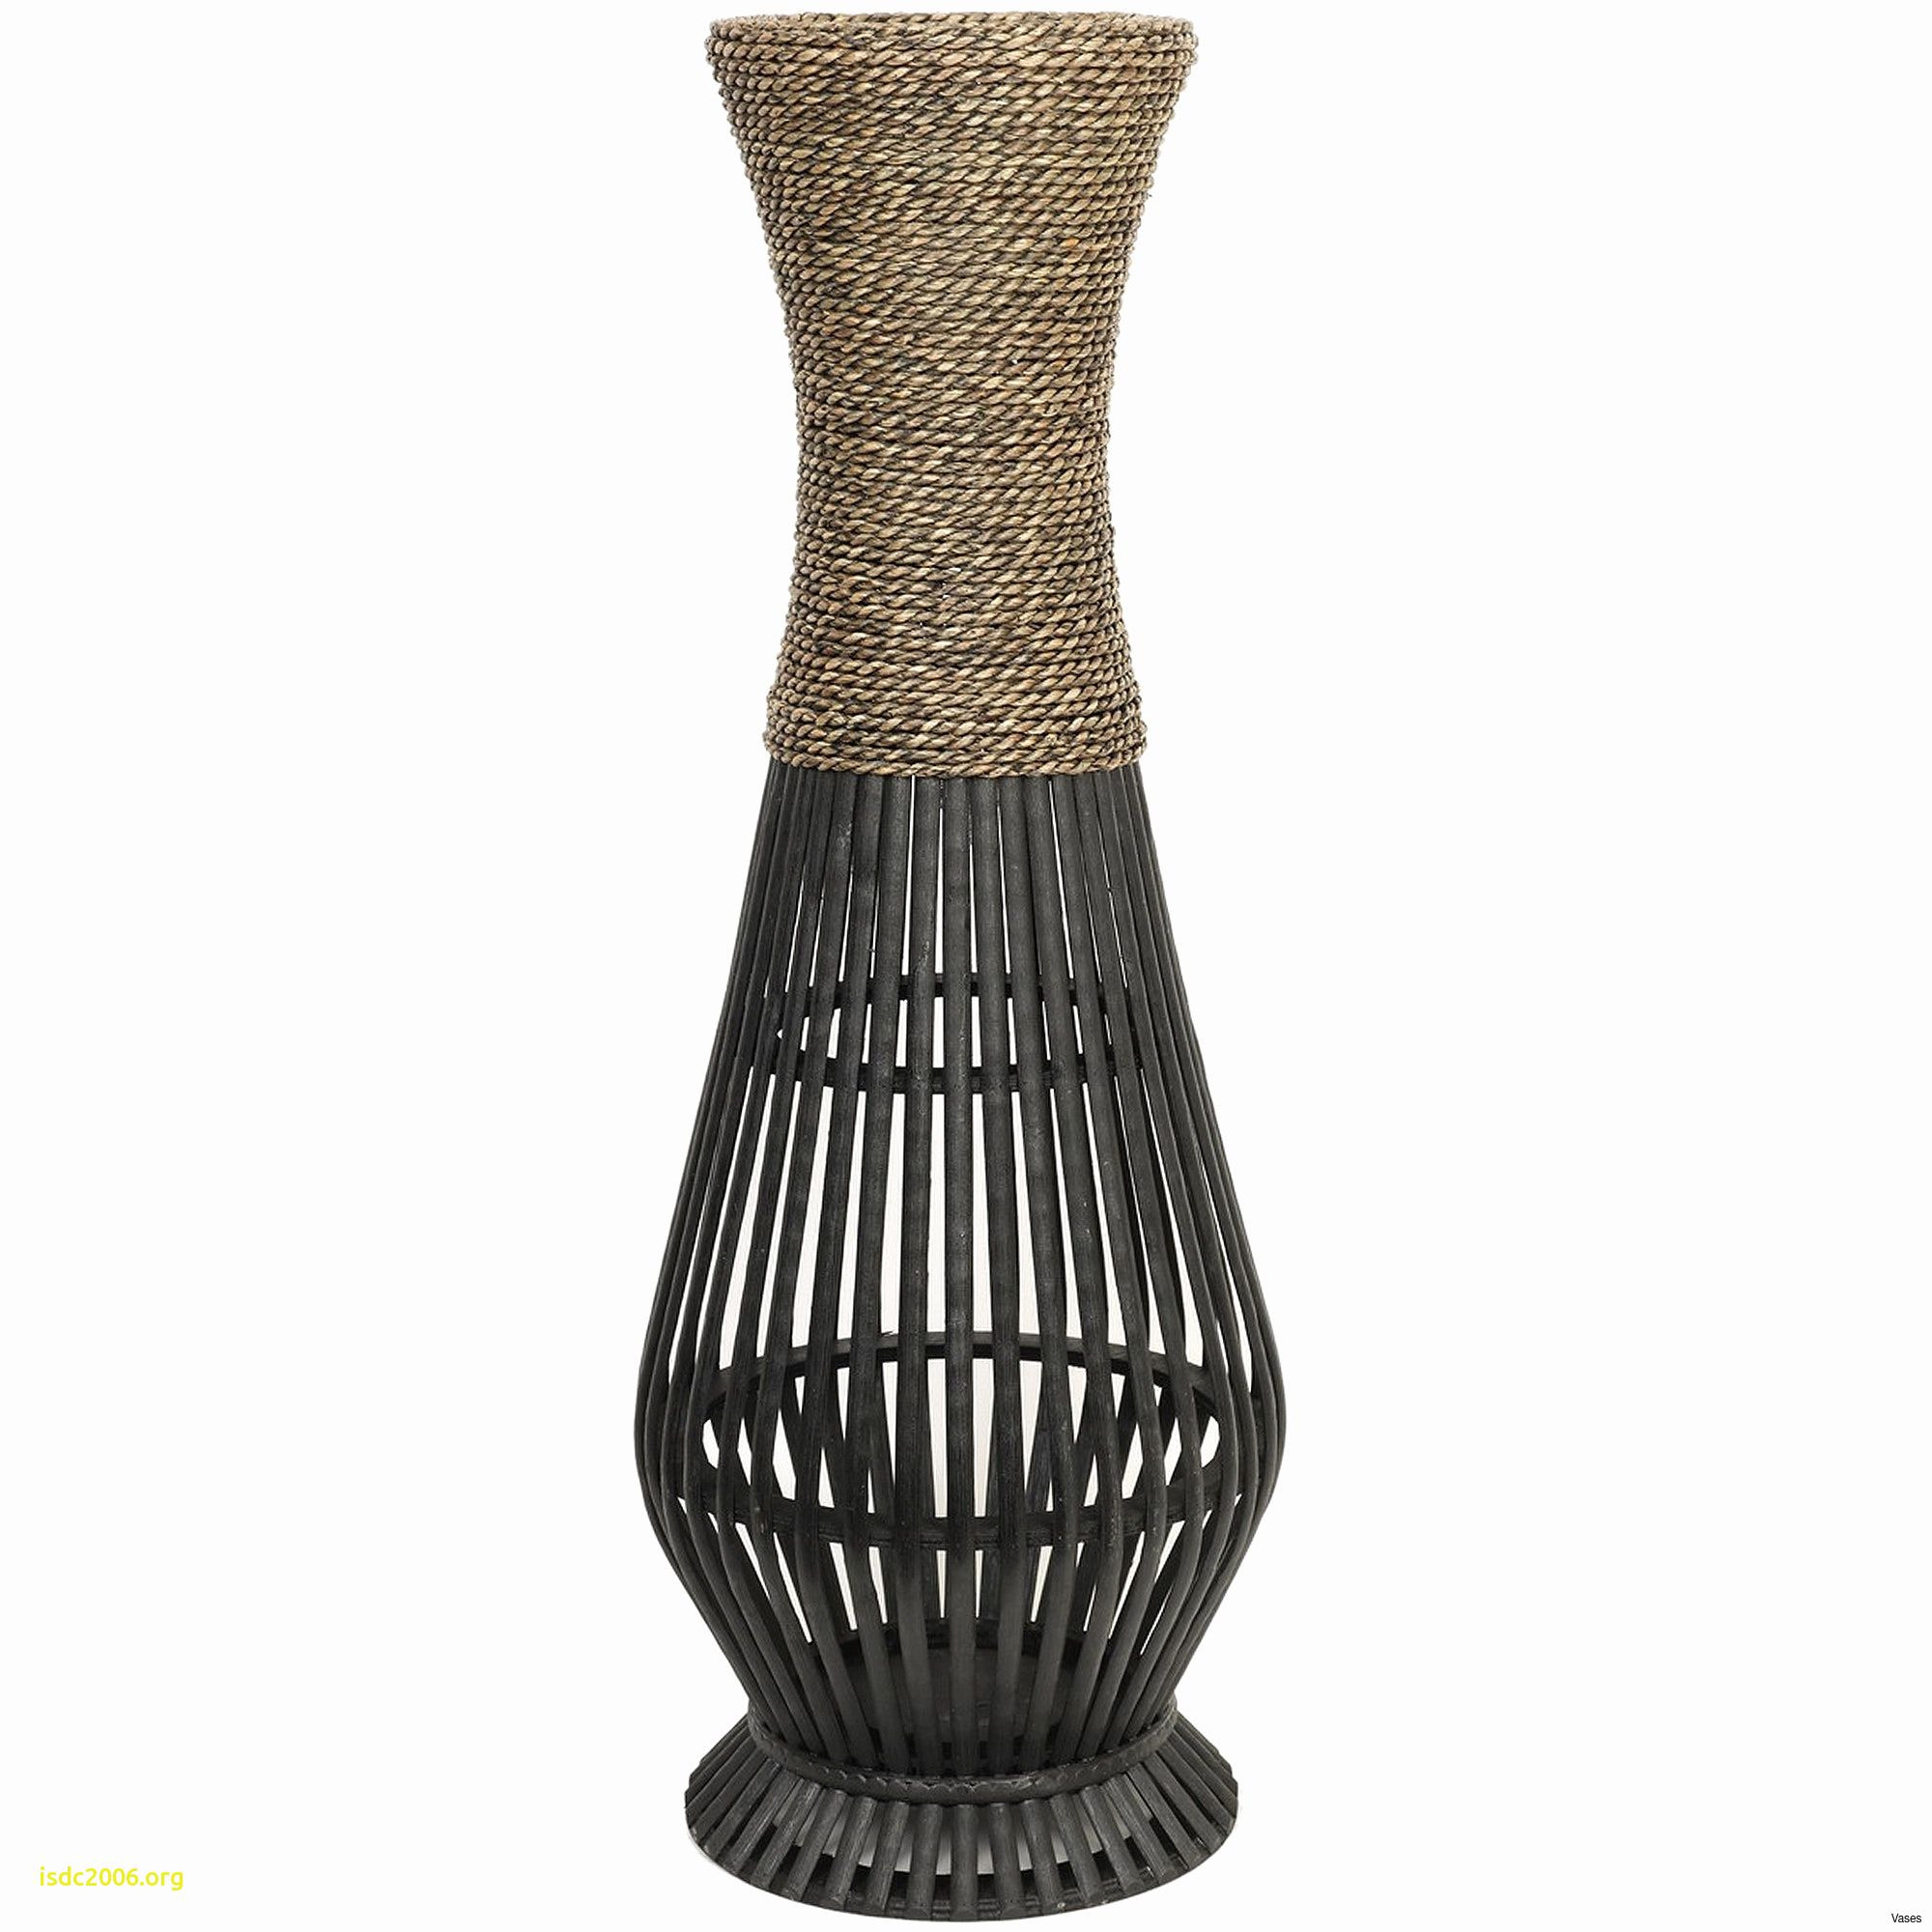 4 Foot Tall Floor Vases Of Best Of Bling Home Decor with Regard to Home Decor Vases Unique D Dkbrw 5743 1h Vases Tall Wood Vase I 0d Base Profiles